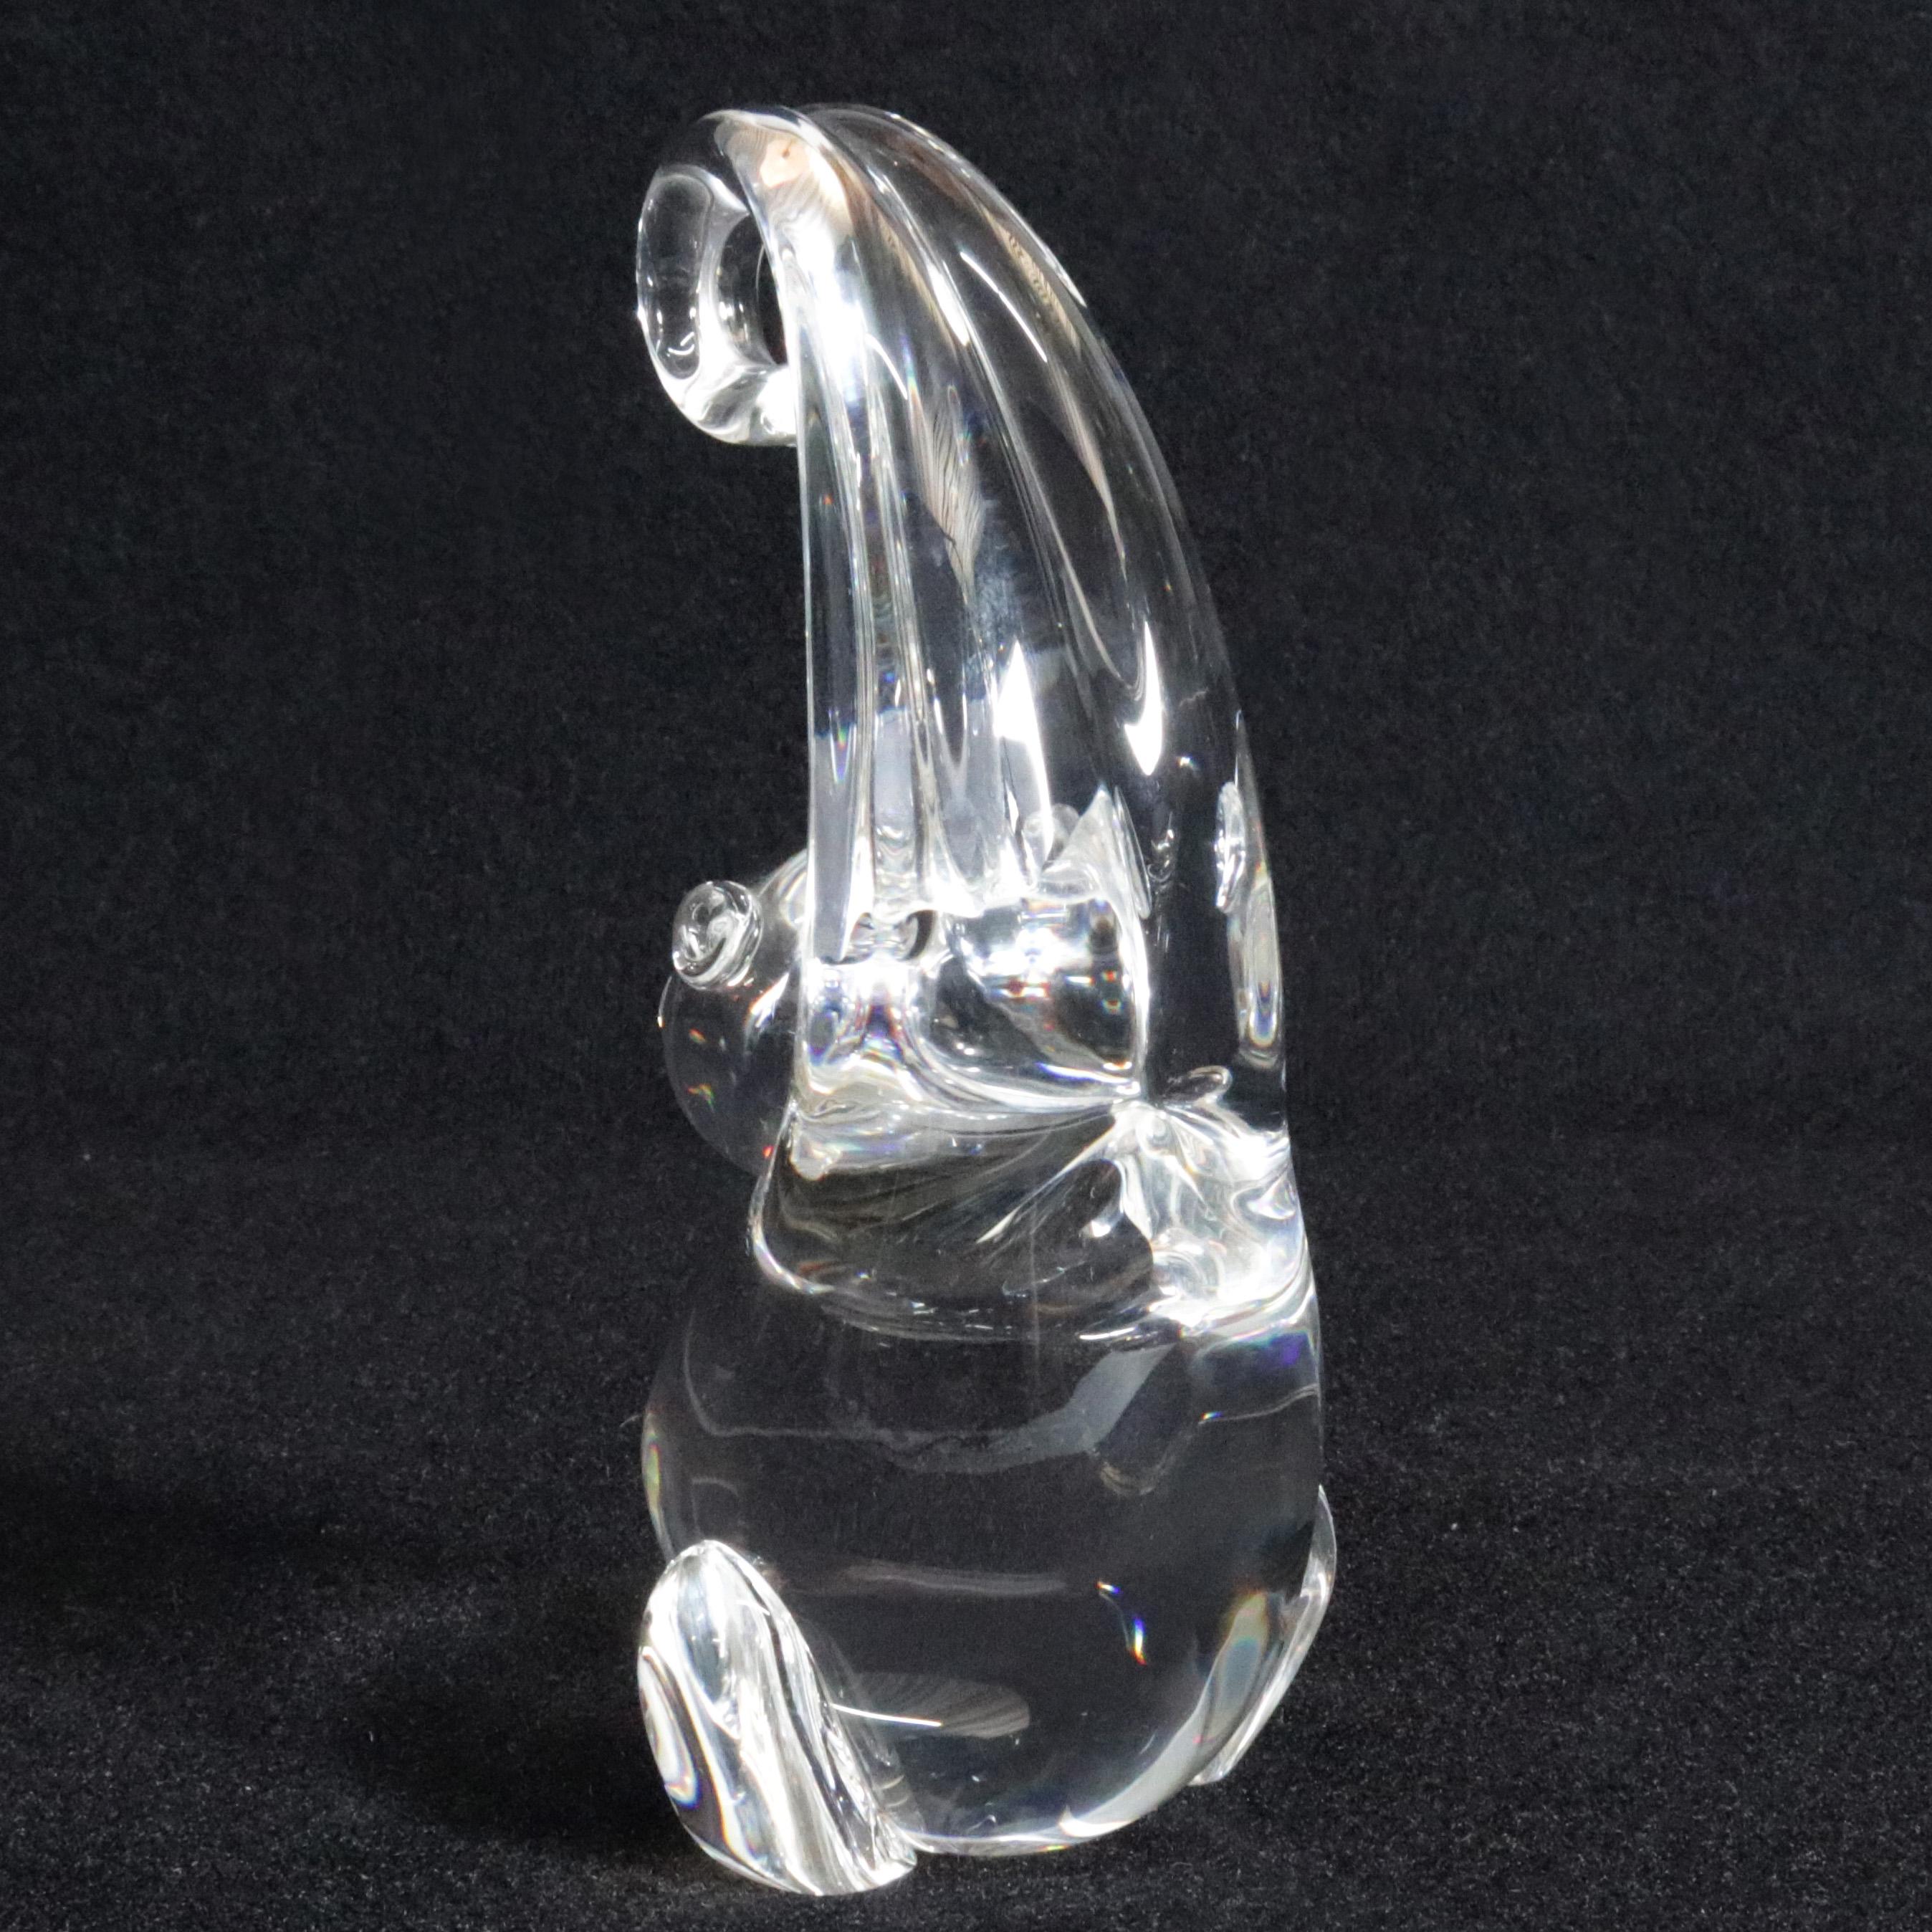 Steuben Figurative Crystal Sculpture Monkey Paperweight by de Sousa, Signed 1